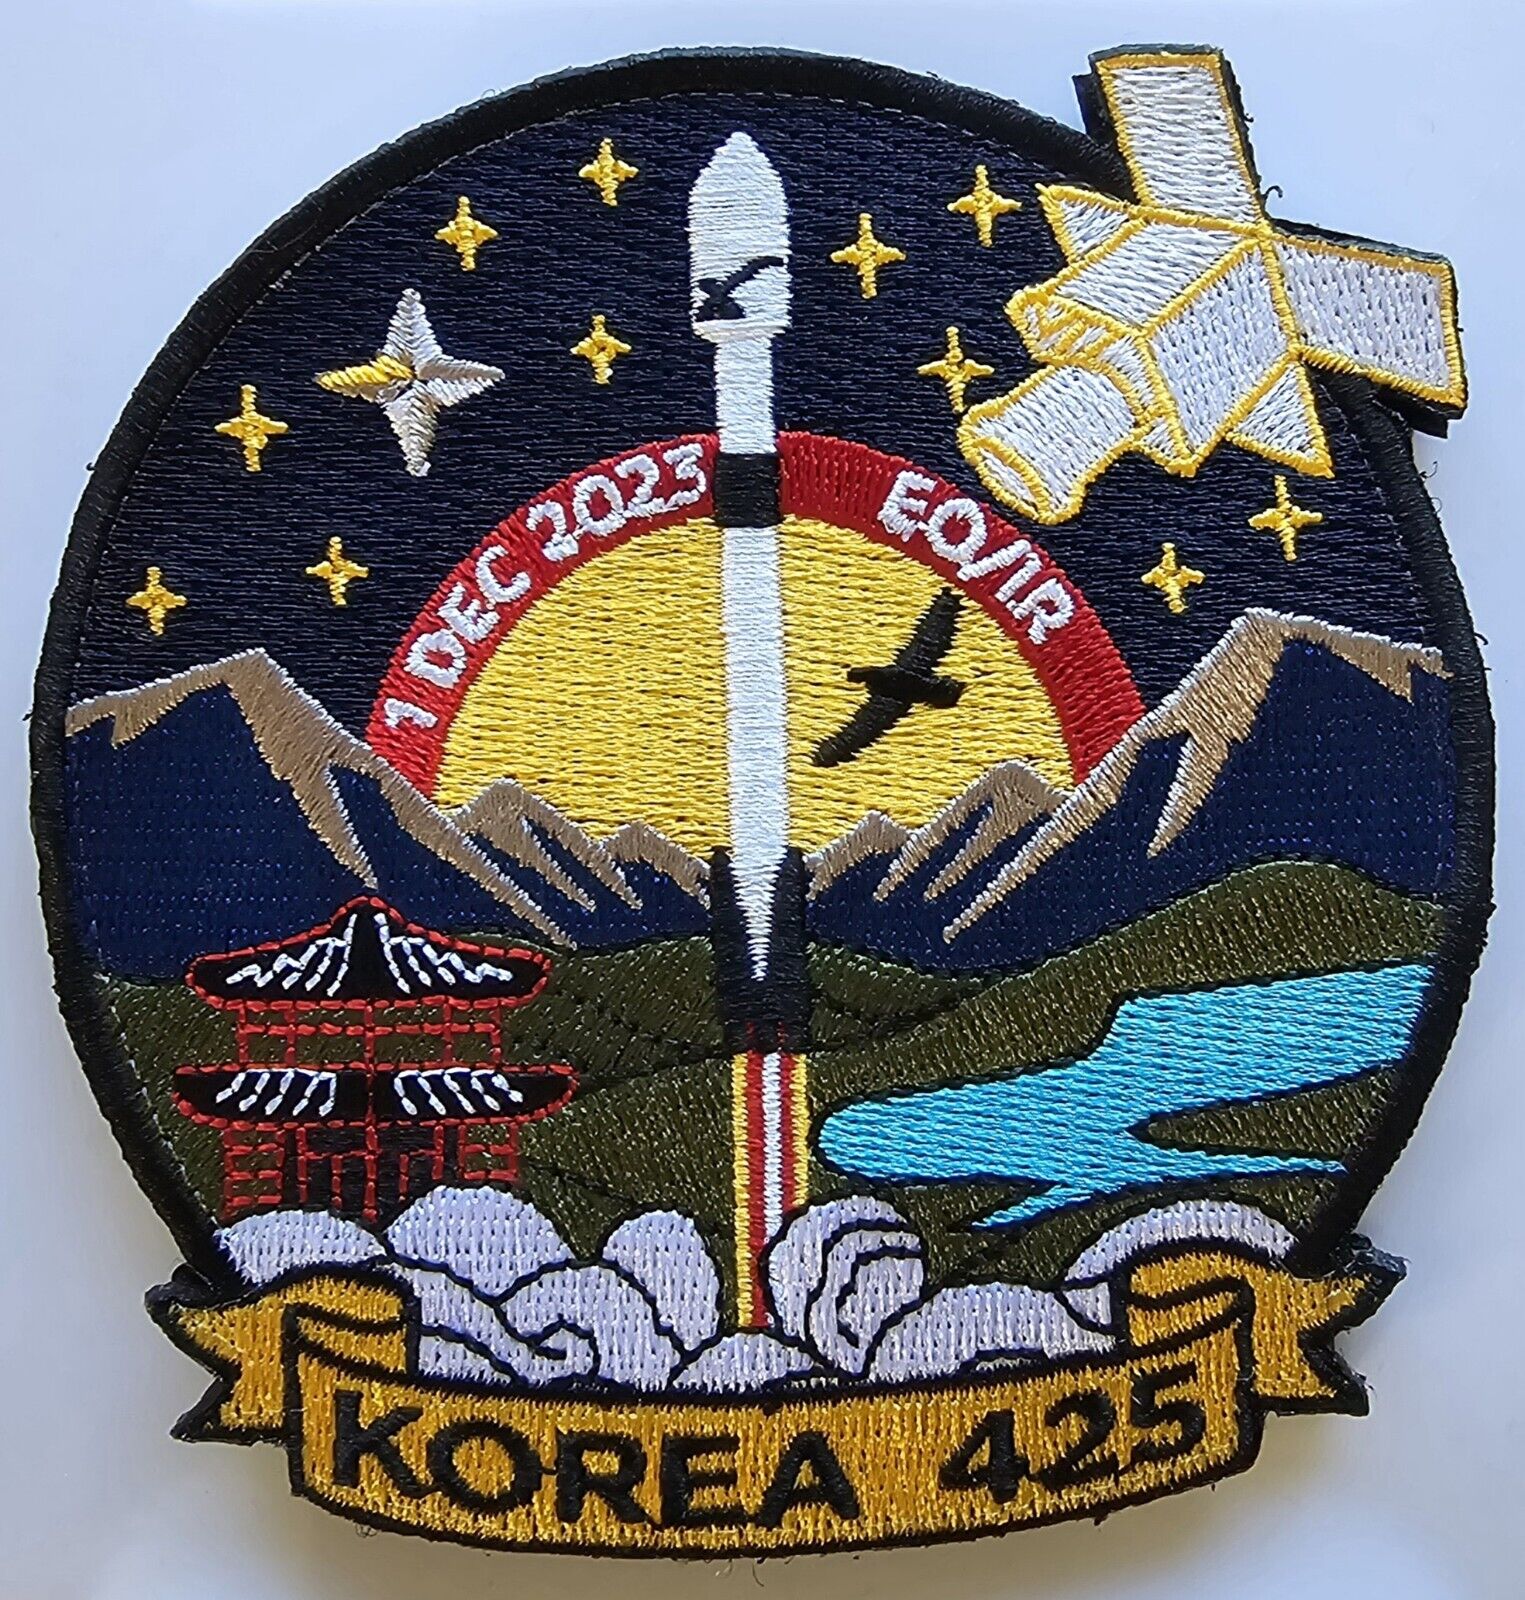 Authentic USSF SLD-30 Korea 425 Space Launch Mission Patch - SpaceX Falcon 9